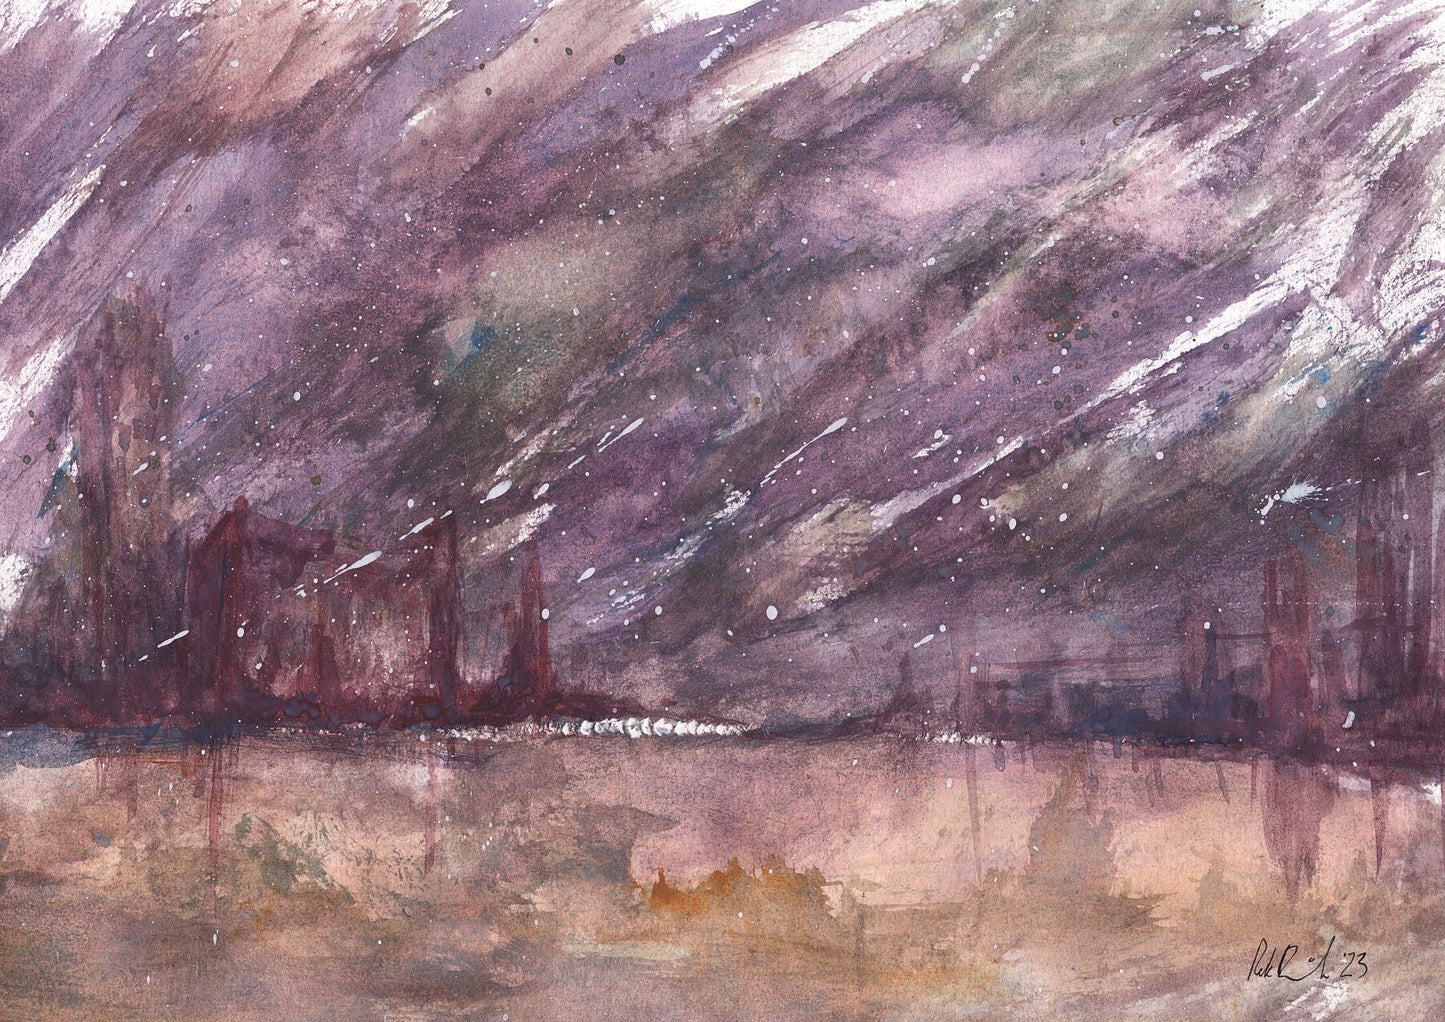 Abstract Storm, Watercolour - Giclee Print by The Rik Barwick Studio